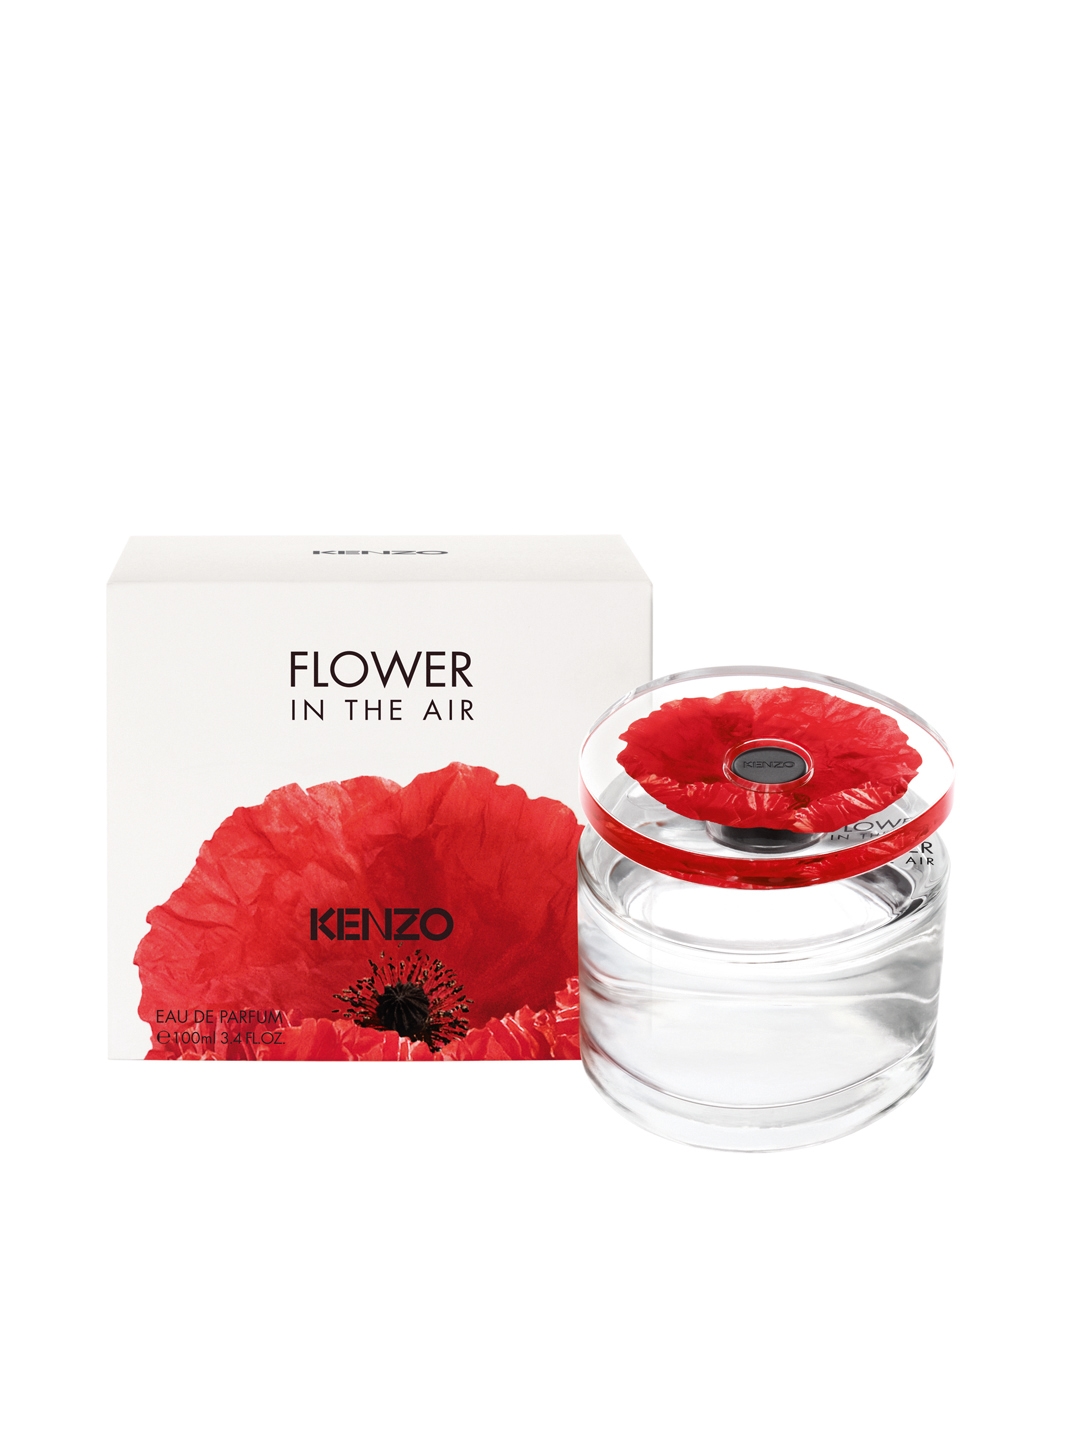 flower in the air by kenzo